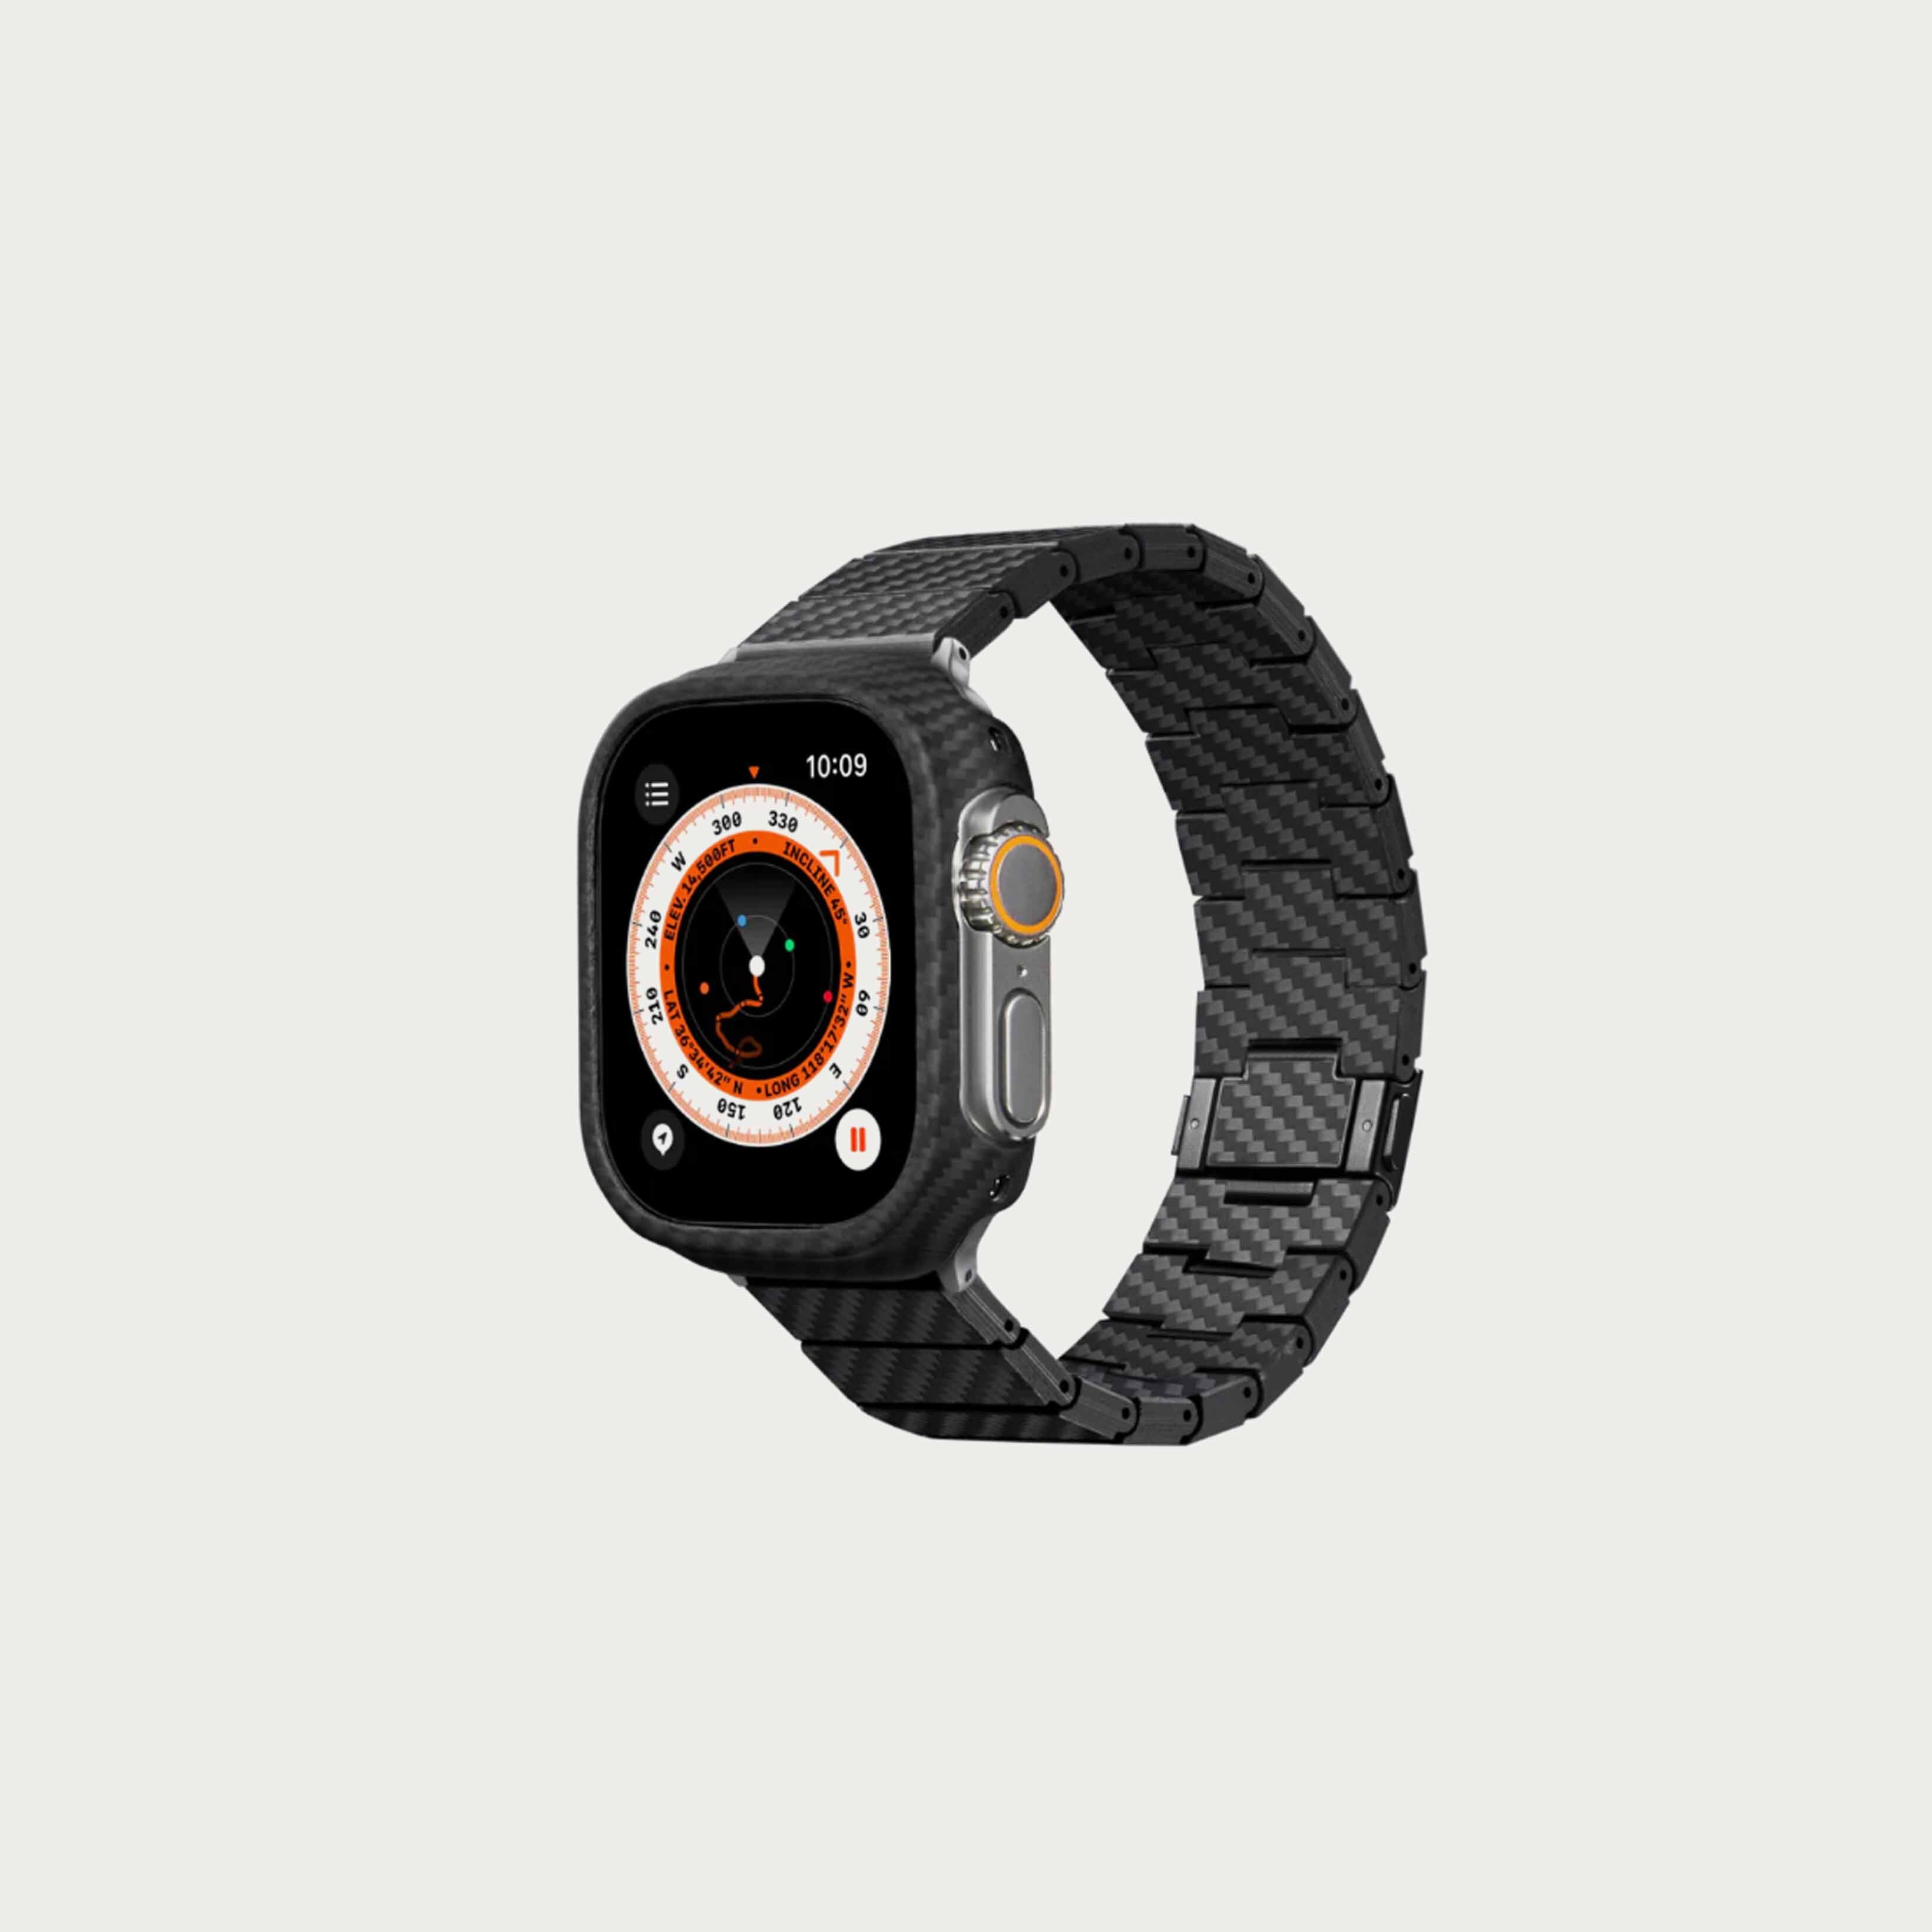 Pitaka Carbon Fiber Link for Moment Band -… Watch - Apple